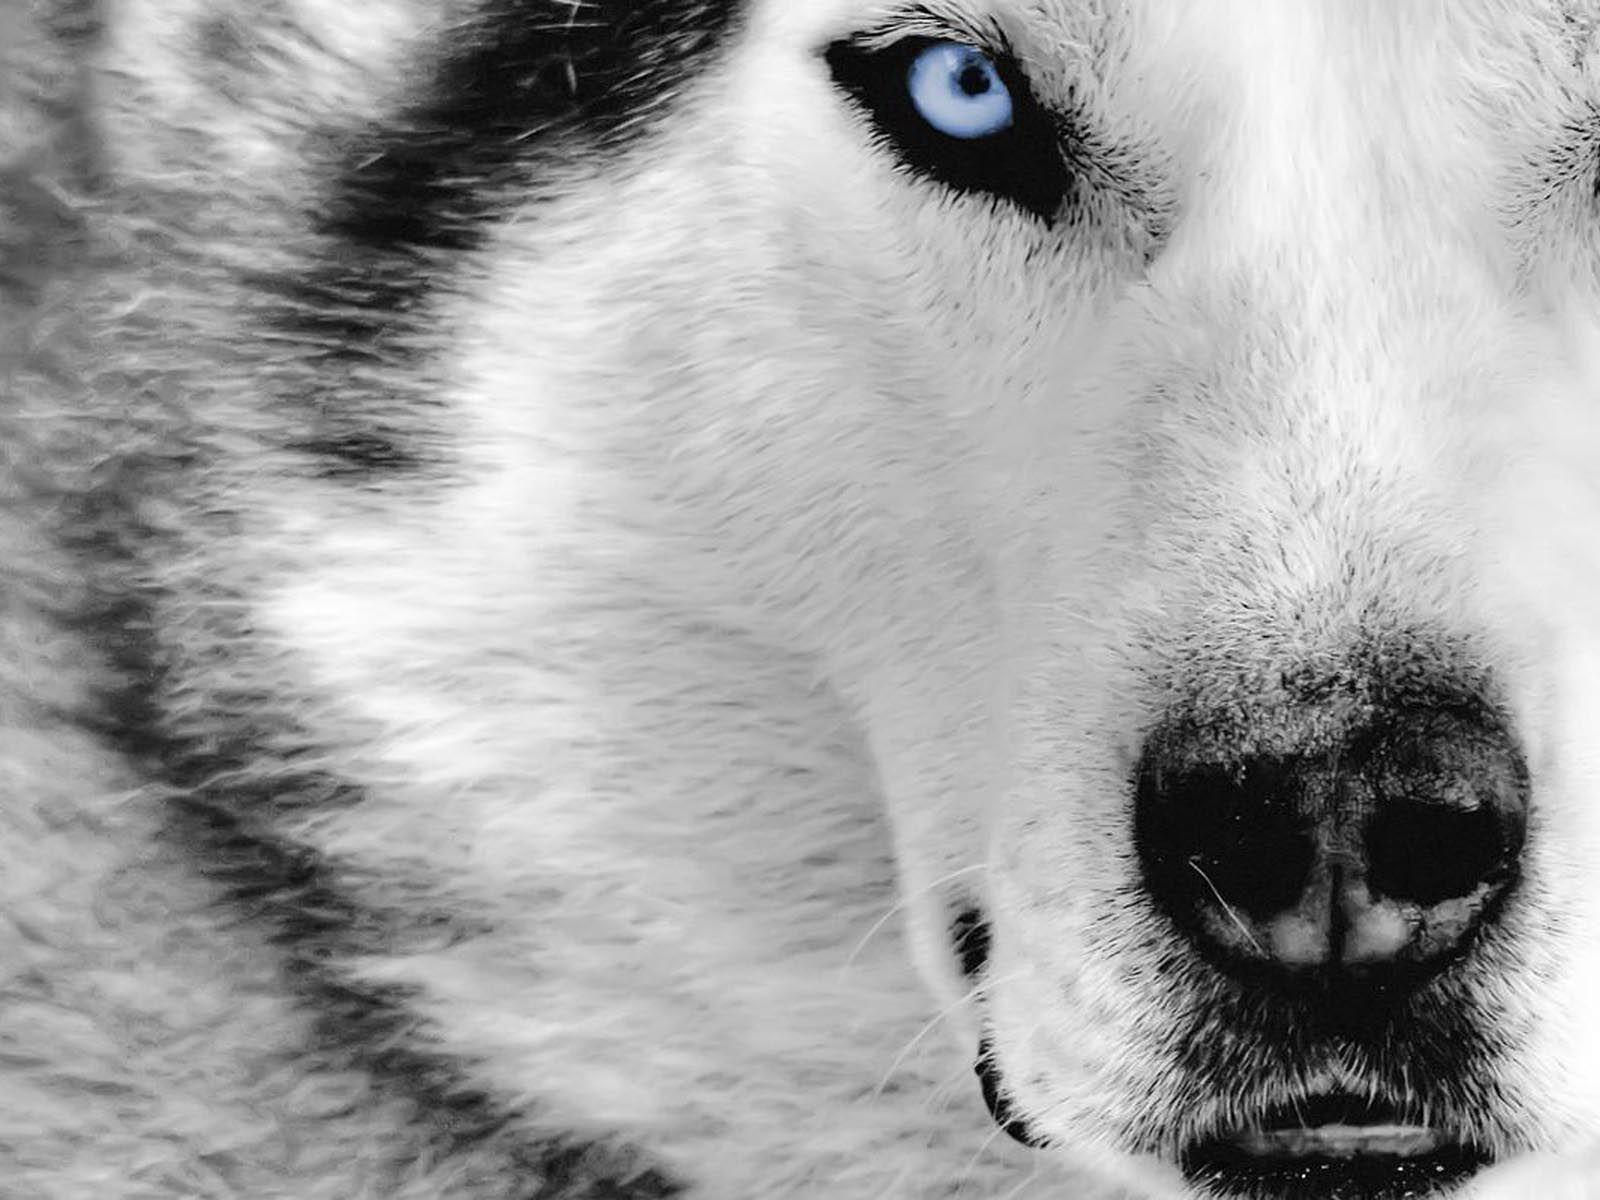 Husky Dog Wallpaper HD 80615 for Walls and Border. lol. Wolf